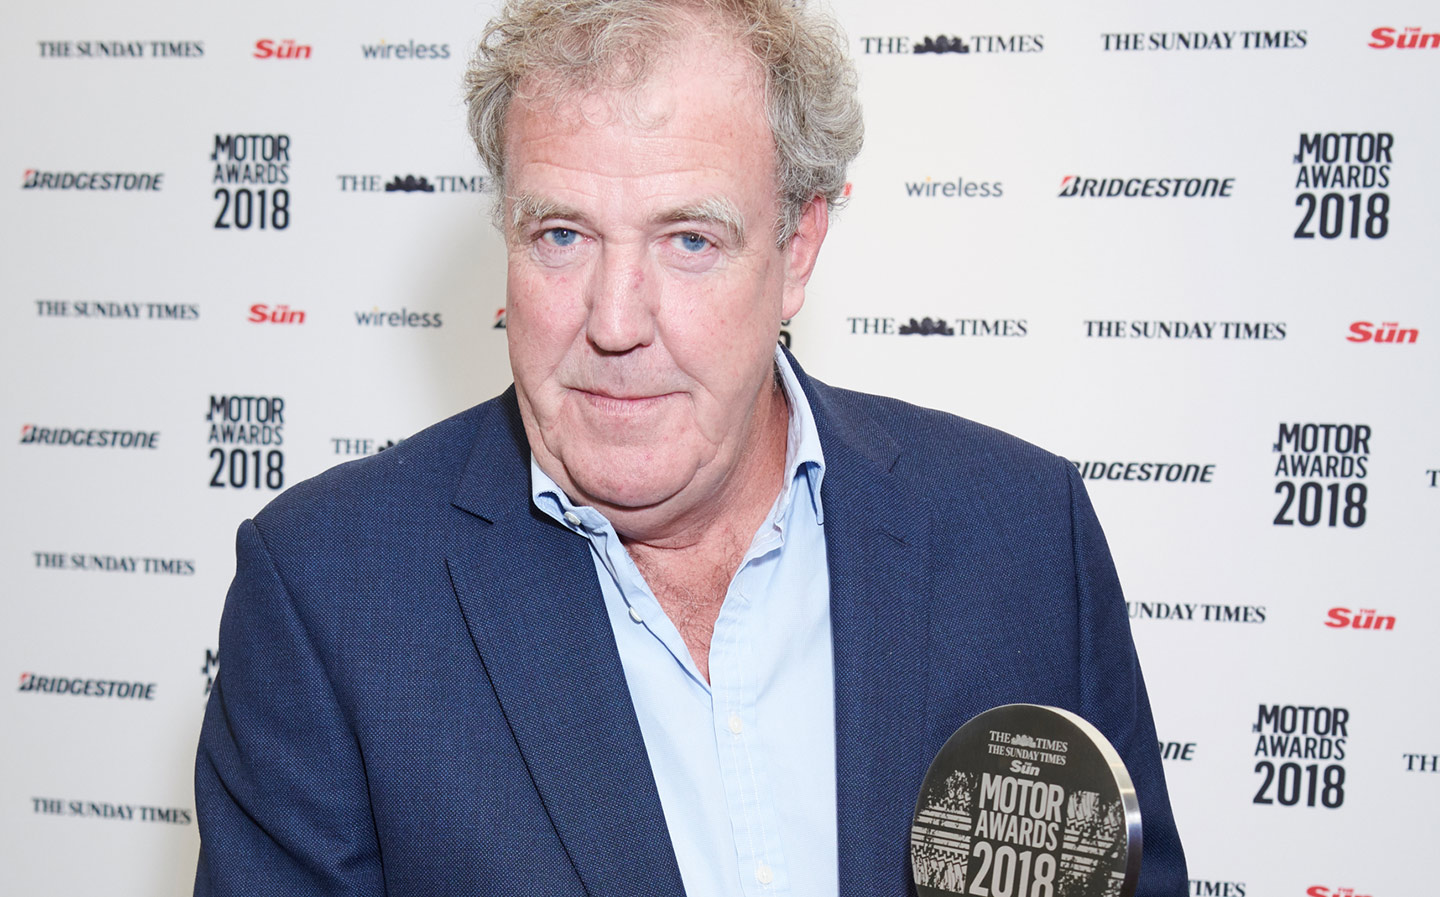 Jeremy Clarkson's top five favourite cars of 2018